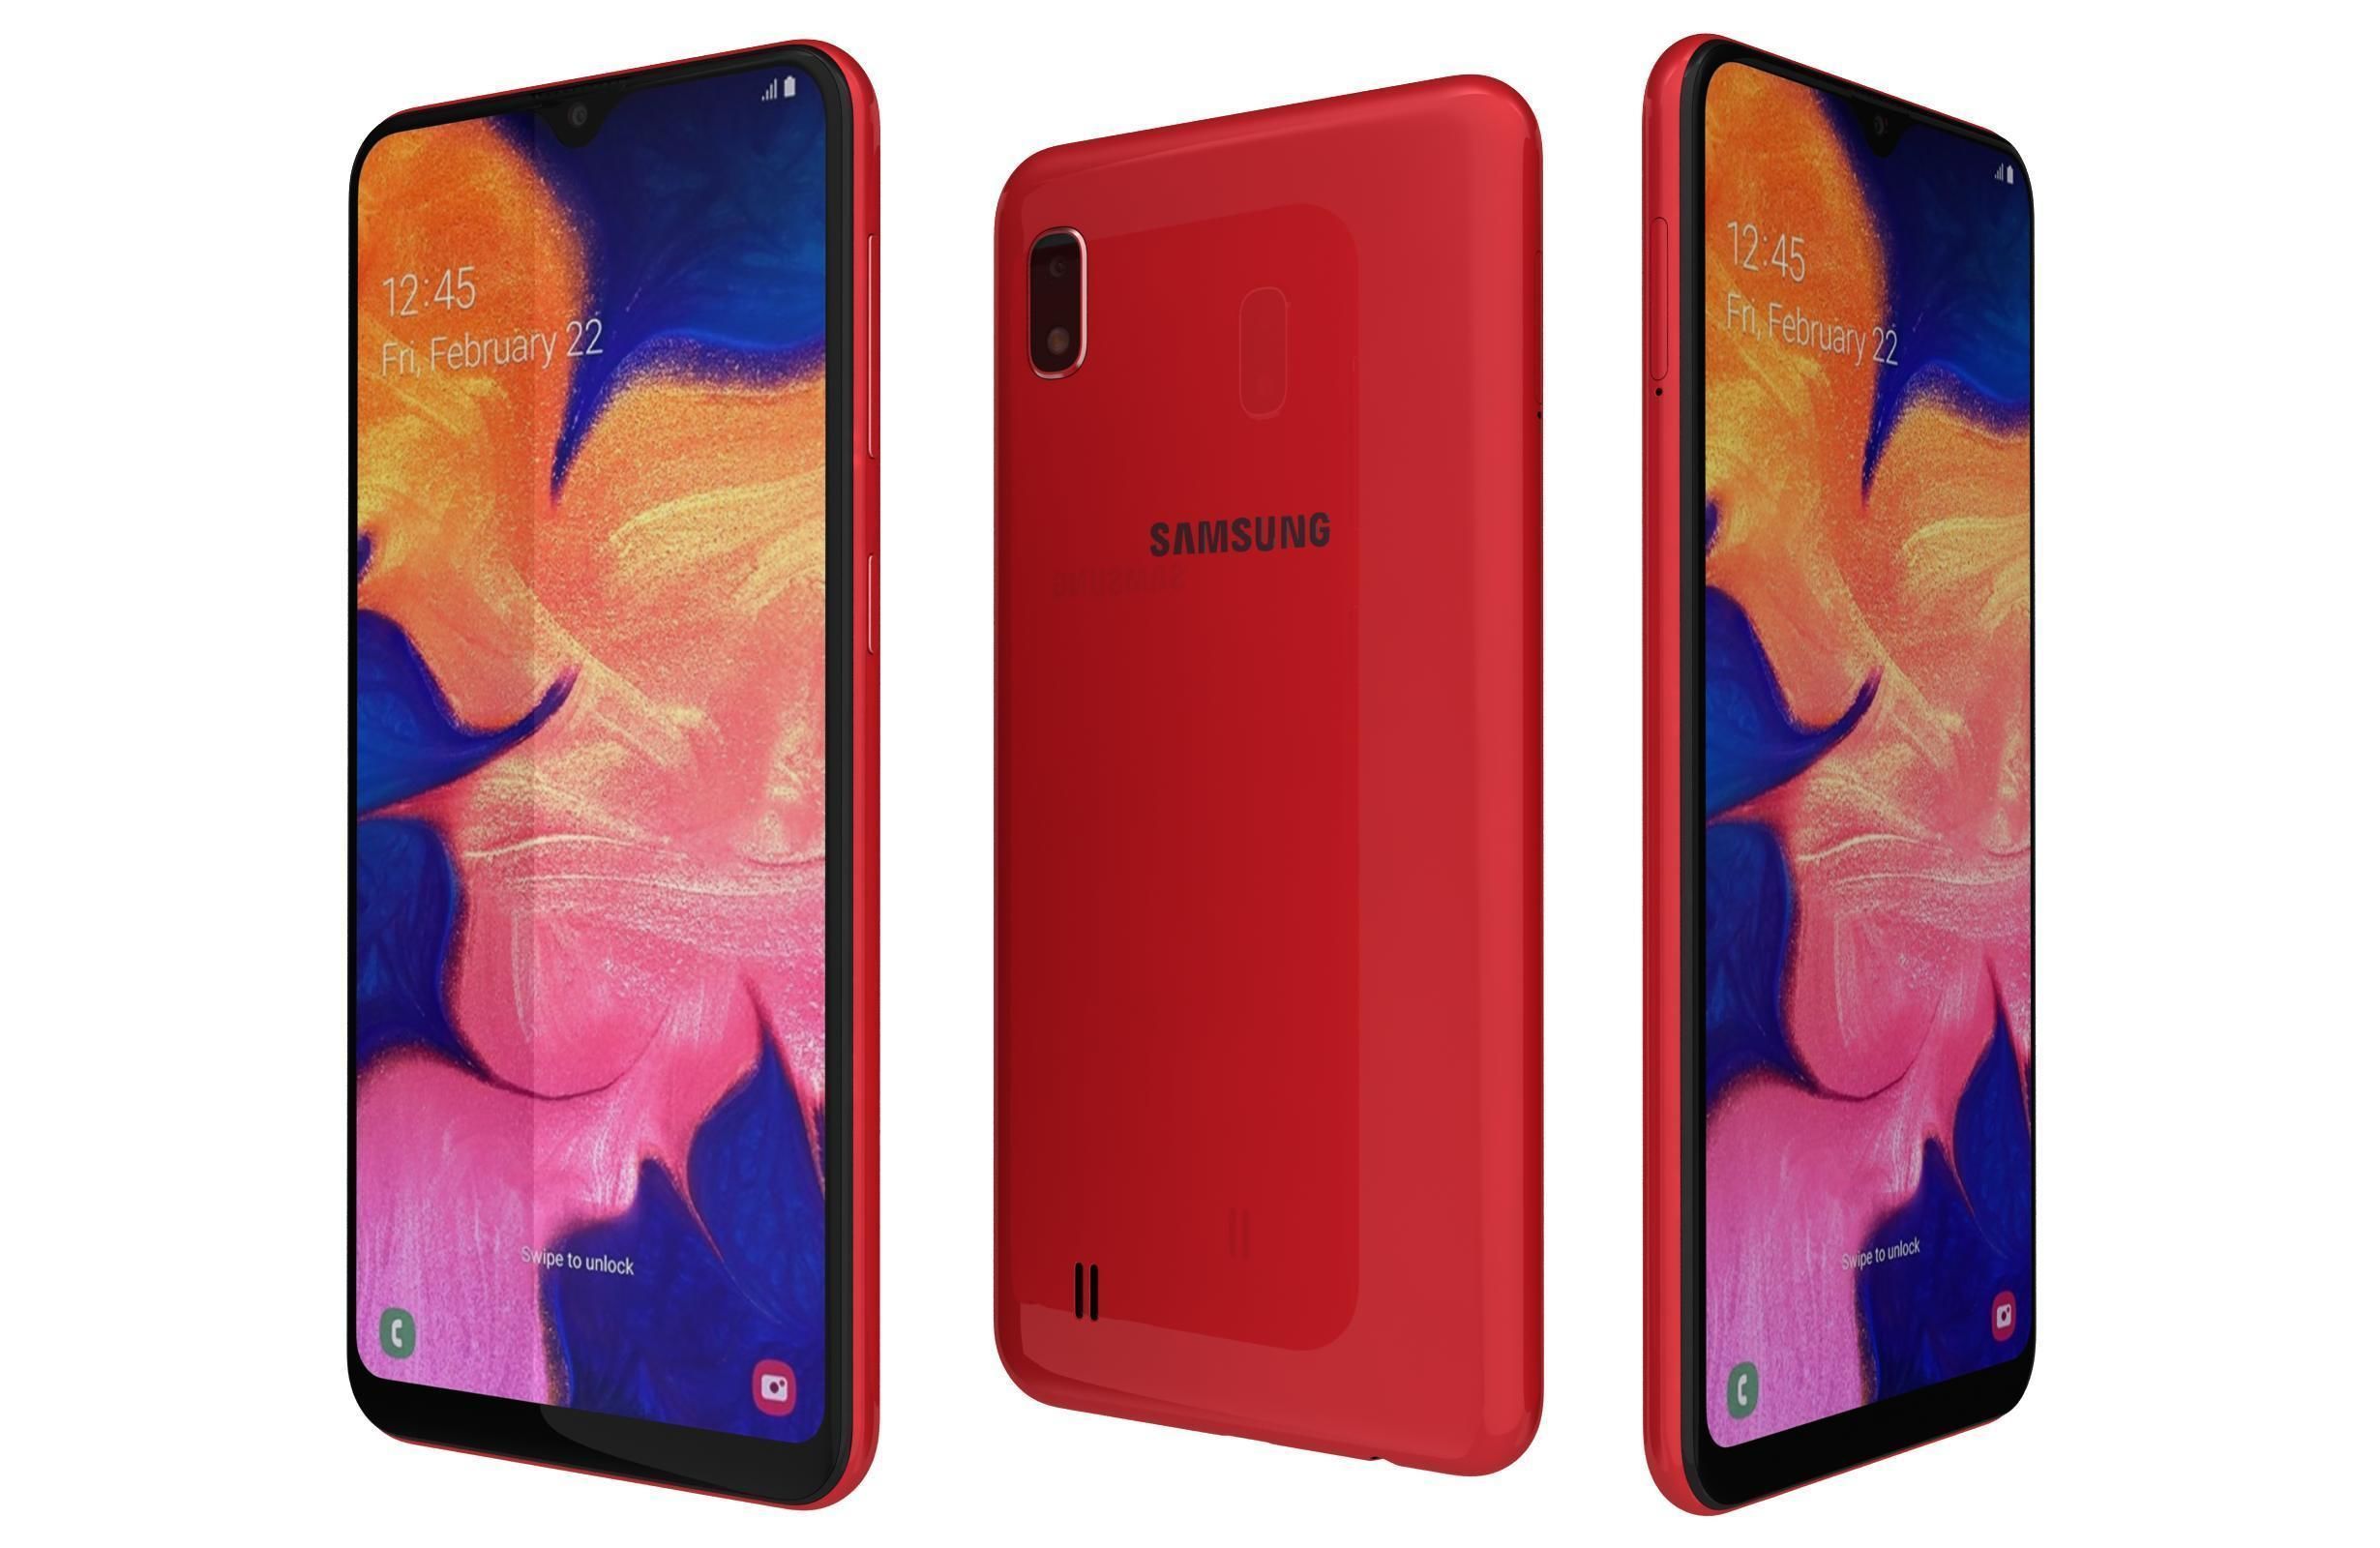 Samsung Galaxy A10 Mobile Specification and Price in Bangladesh